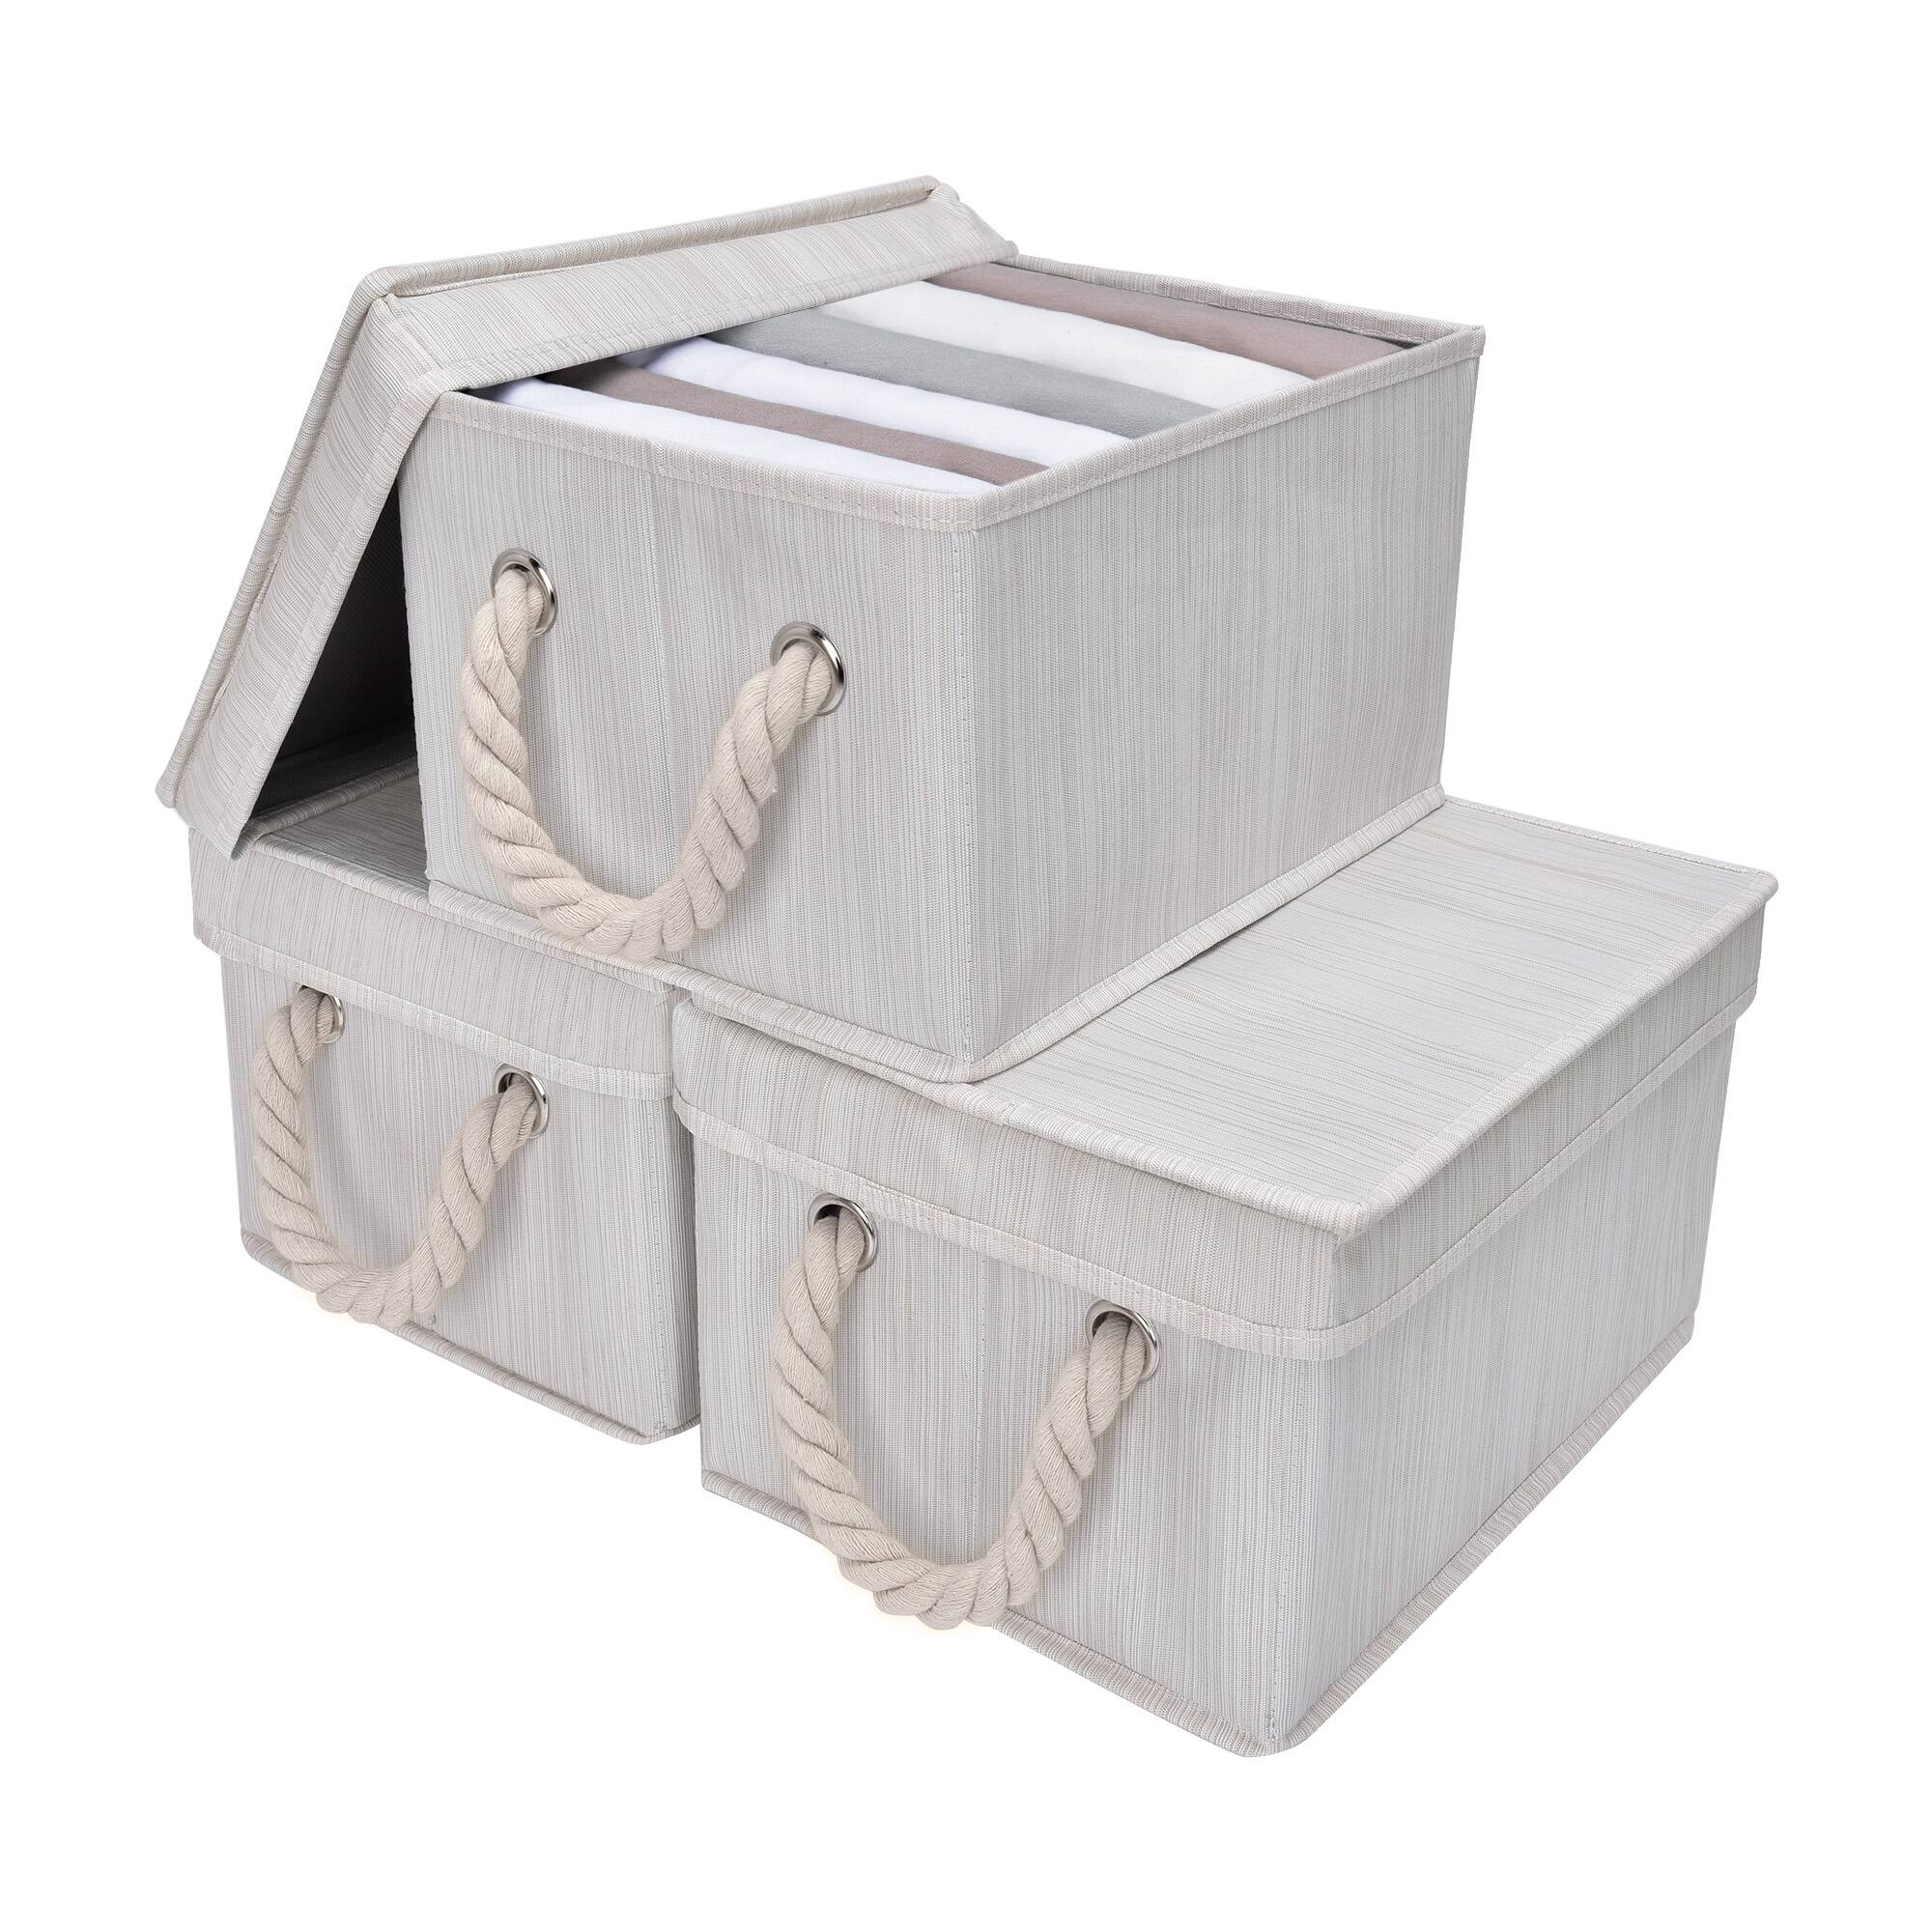 StorageWorks Storage Boxes With Lids, Mixing of Beige, White & Ivory, Medium, 3-Pack $17.99 + Free Shipping